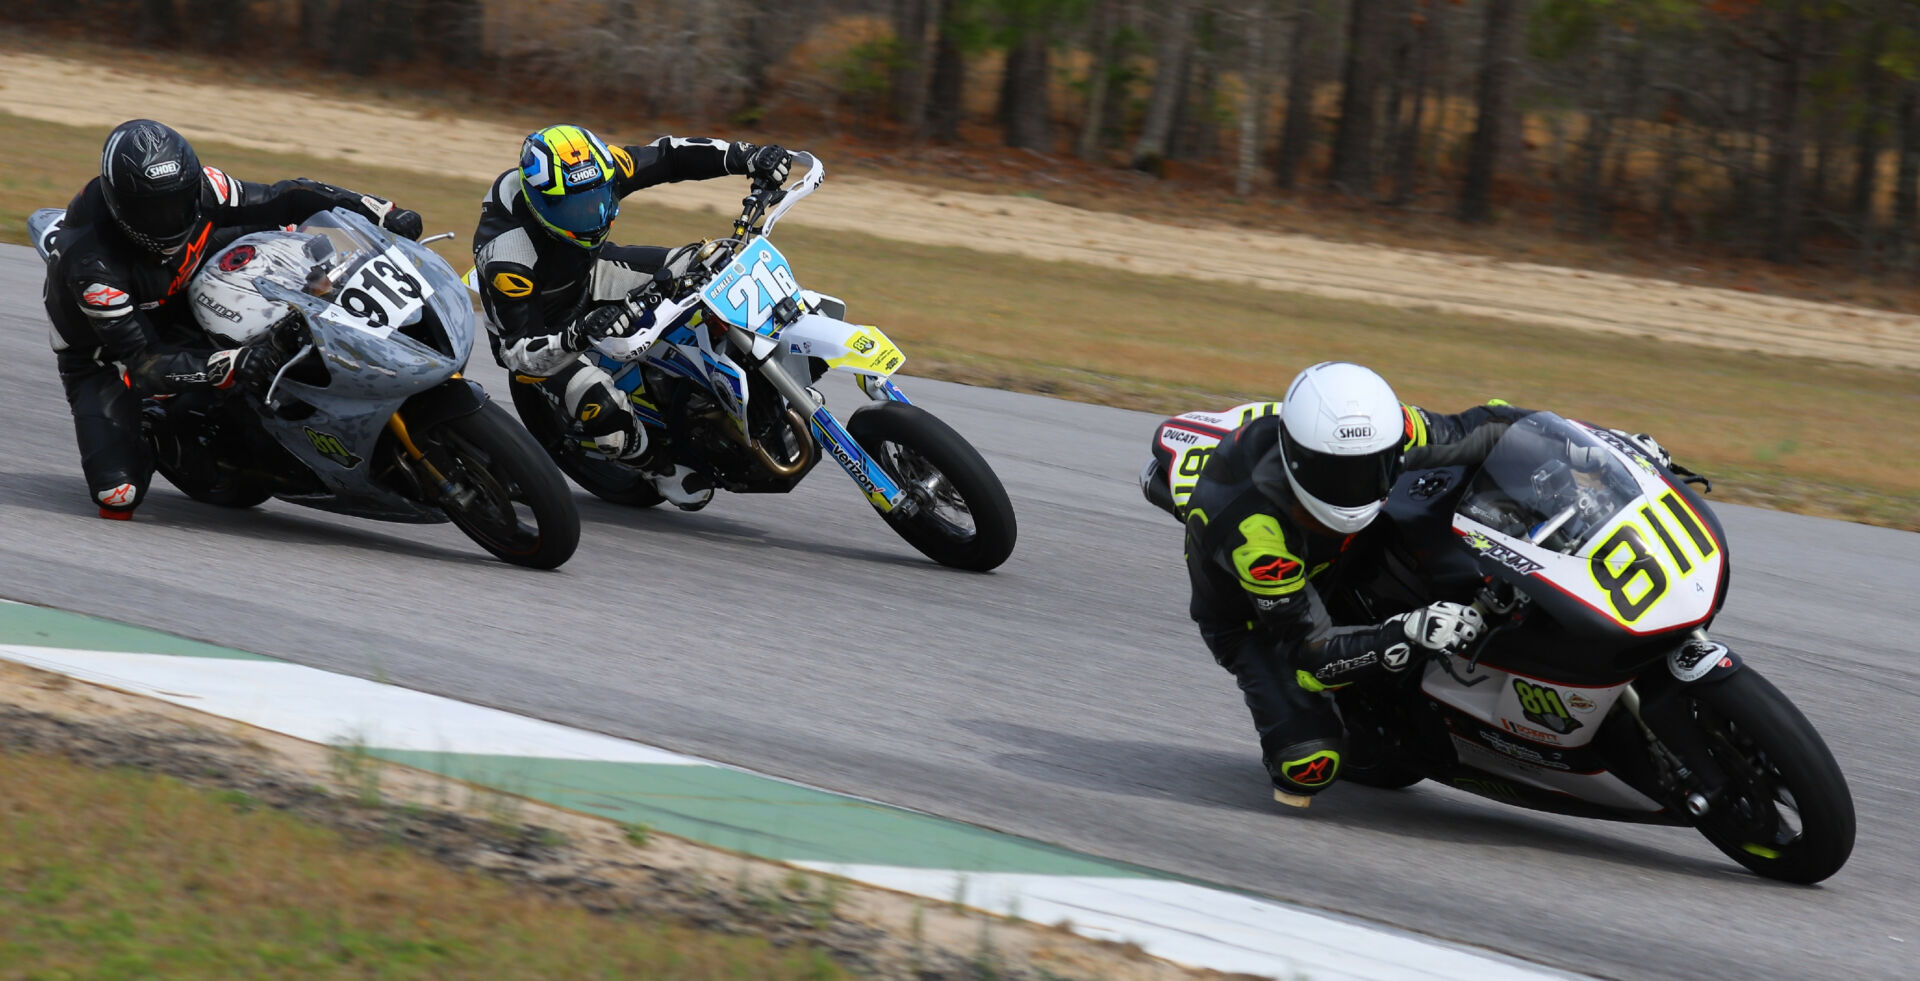 AHRMA racers Tommy Ryan (811), Arch E. York (913), and Andrew Berkley (21B) in action at Heartland Motorsports Park in 2021. Photo by etechphoto.com, courtesy AHRMA.